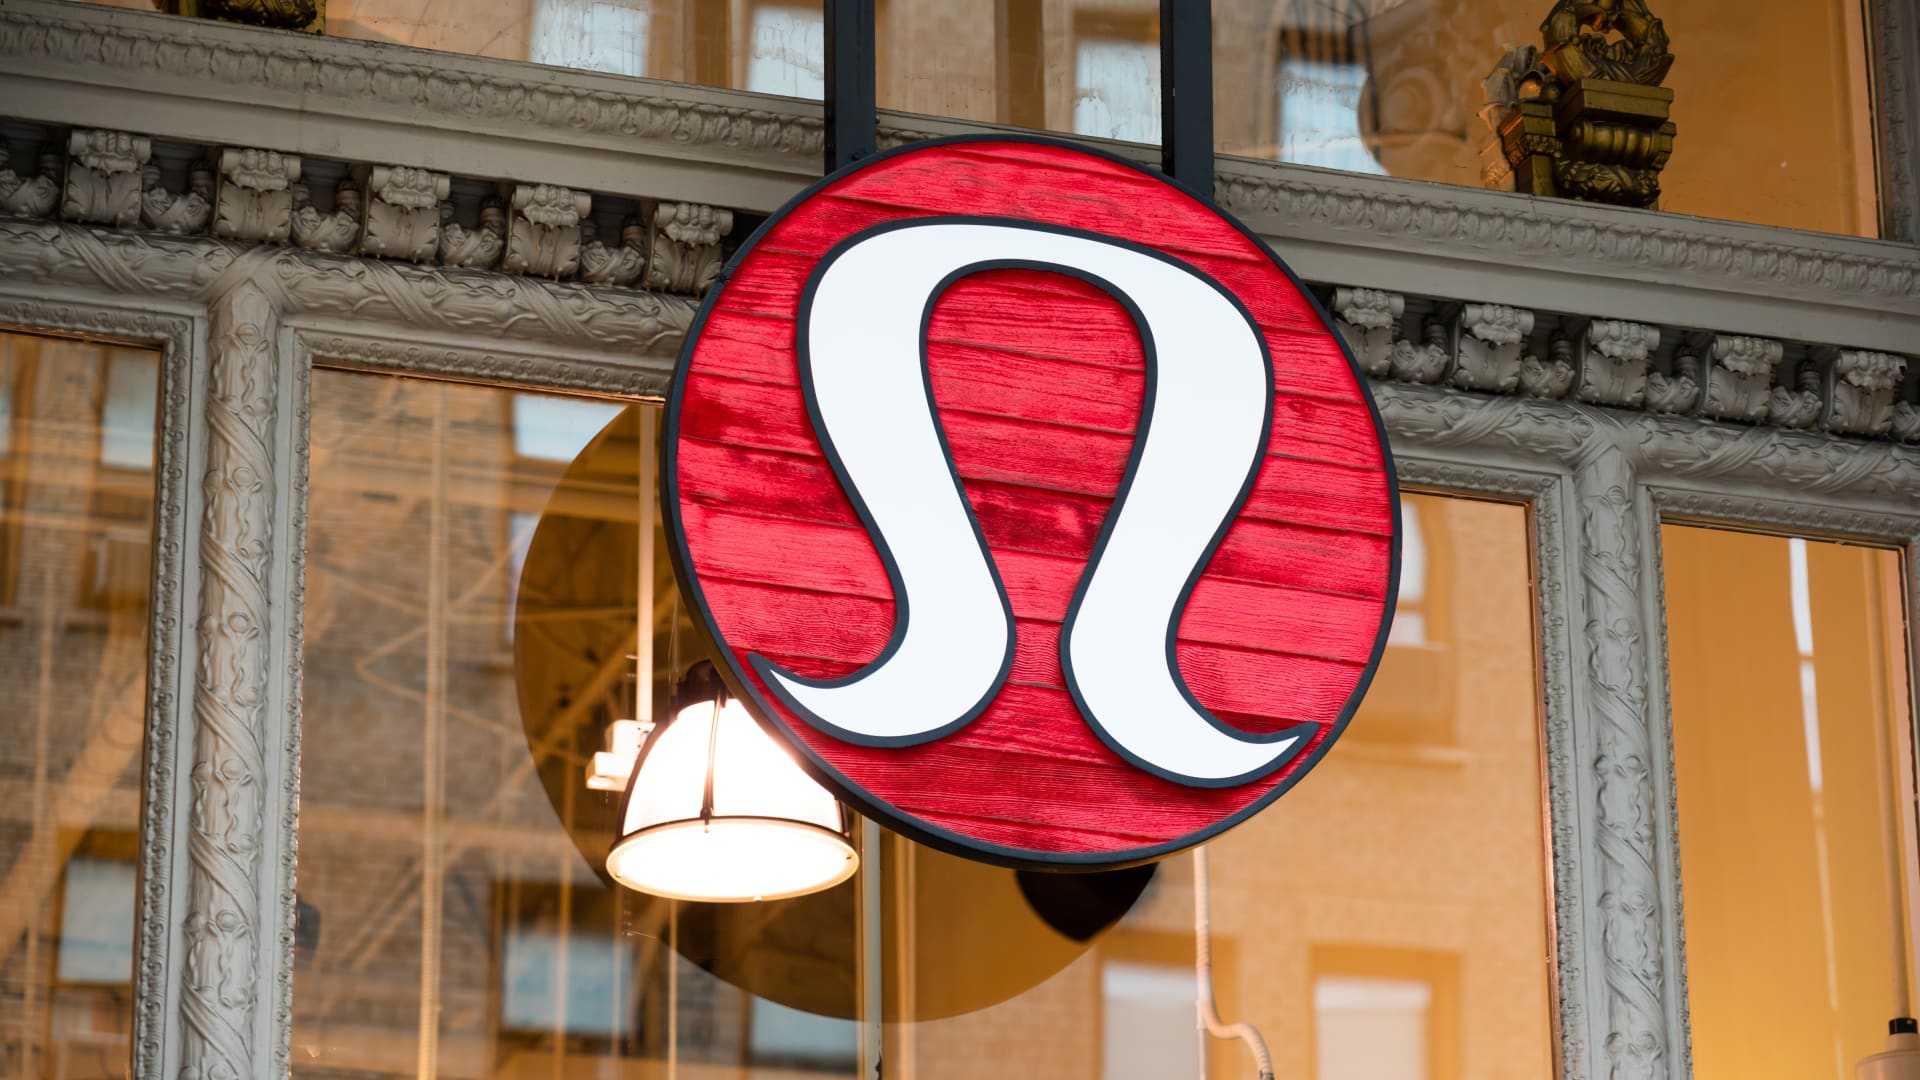 Lululemon just launched Like New, a trade-in and resale program nationwide